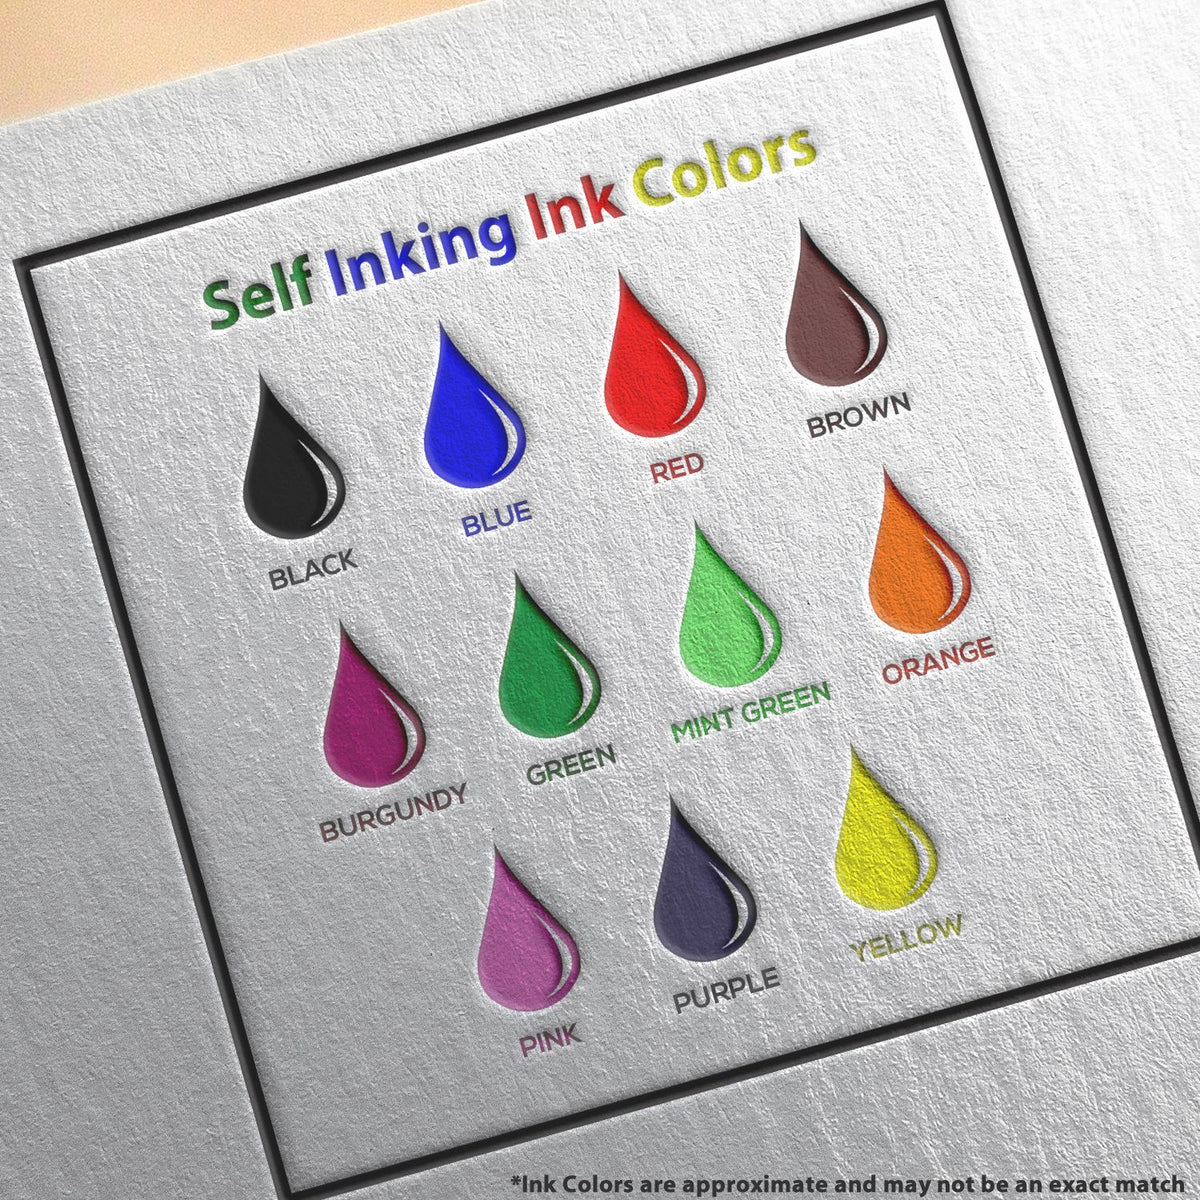 A picture showing the different ink colors or hues available for the Self-Inking Florida PE Stamp product.